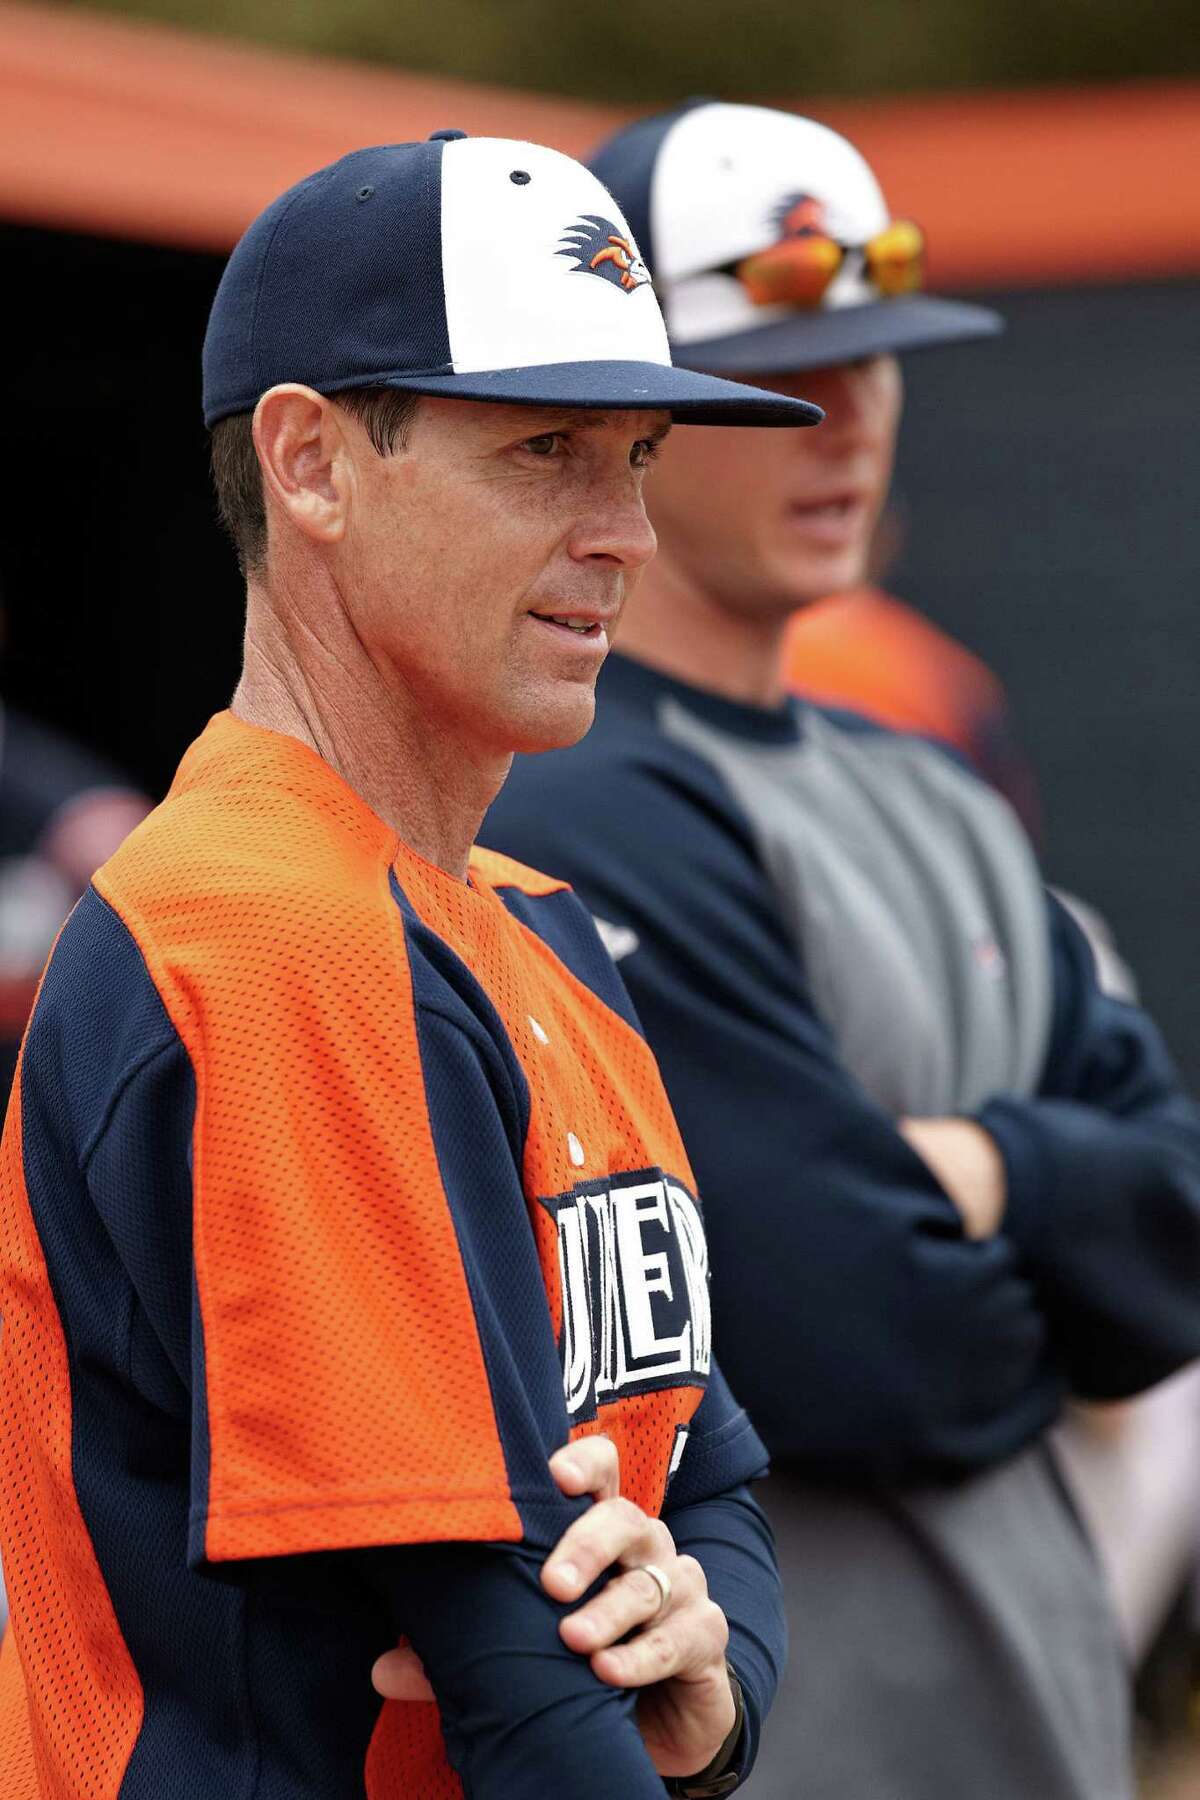 New UTSA baseball coach Jason Marshall spent 17 years as an assistant at his alma mater Texas A&M, followed by McMurry and with the Roadrunners.